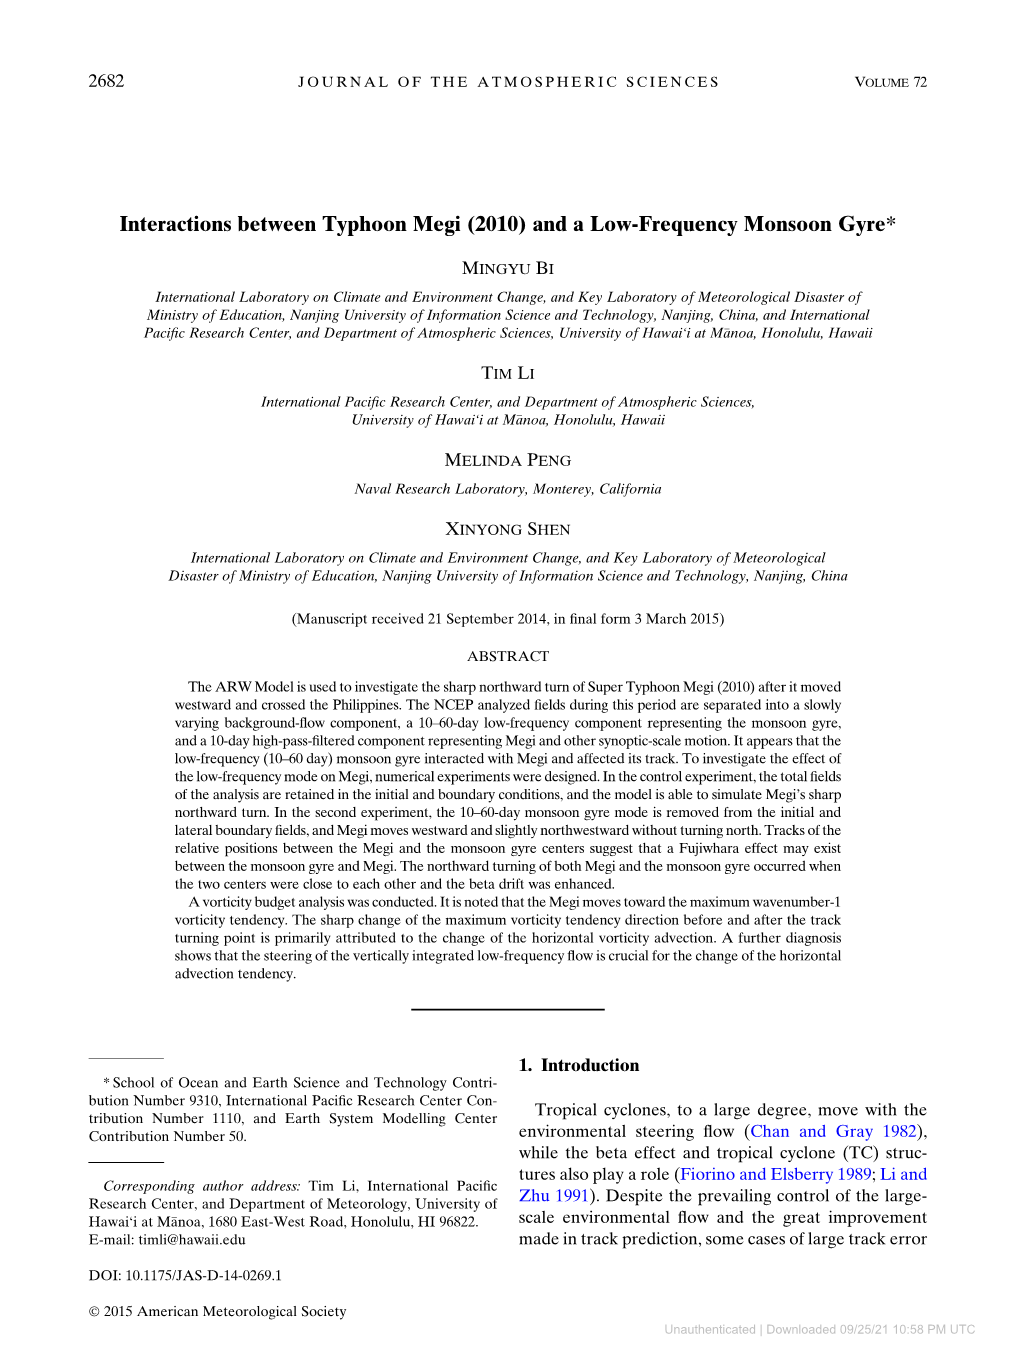 Interactions Between Typhoon Megi (2010) and a Low-Frequency Monsoon Gyre*